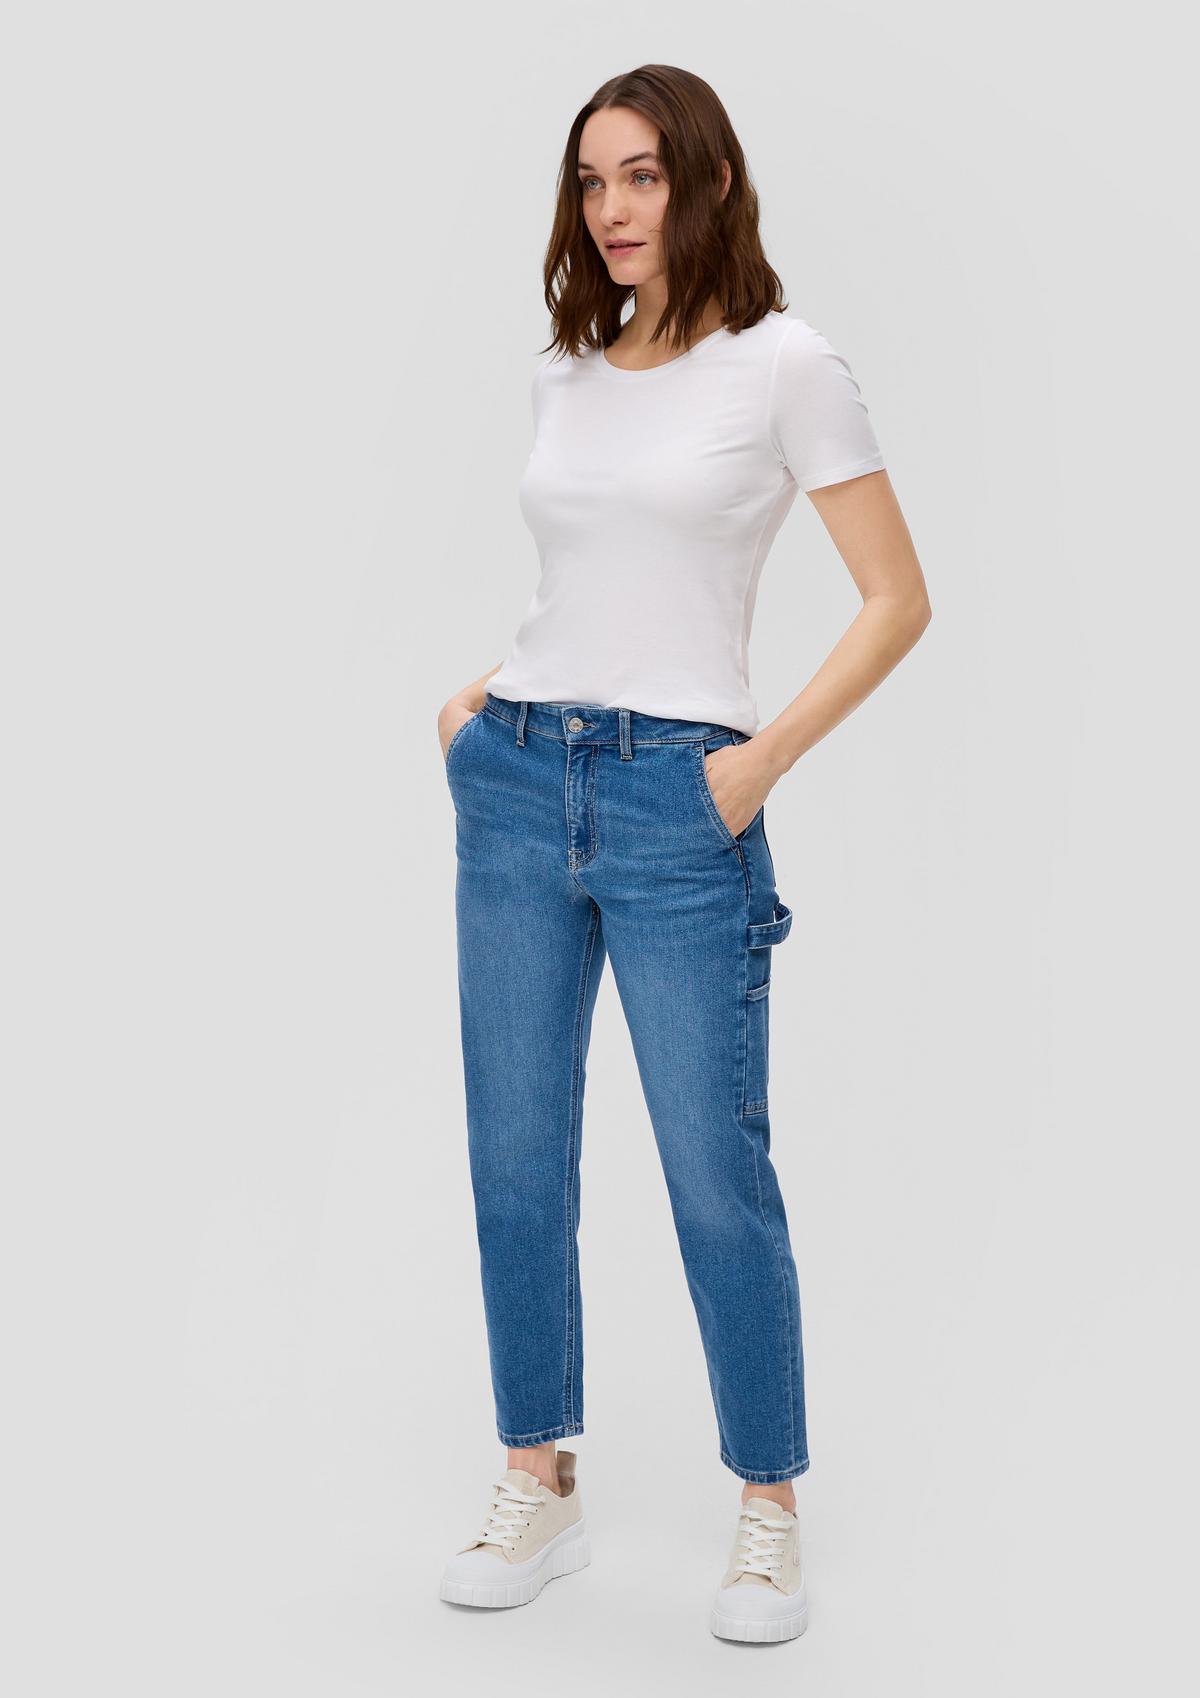 s.Oliver Francis ankle-length jeans / relaxed fit / mid rise / tapered leg / boyfriend